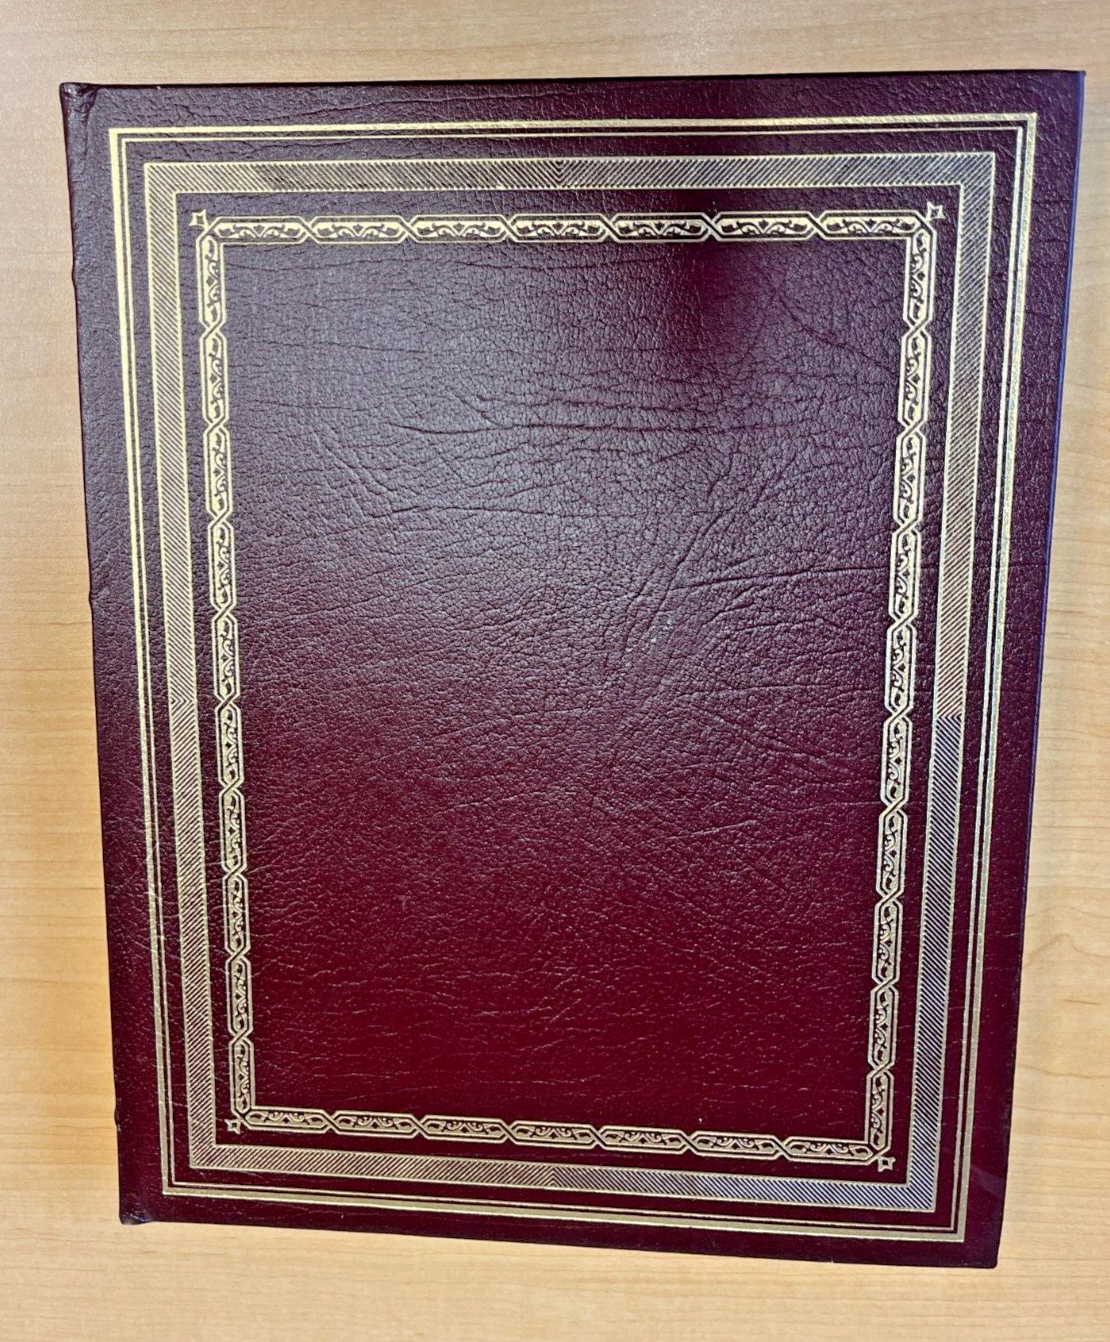 Easton Press Glorious Art Series Leather The Art of Ancient Greece 22K